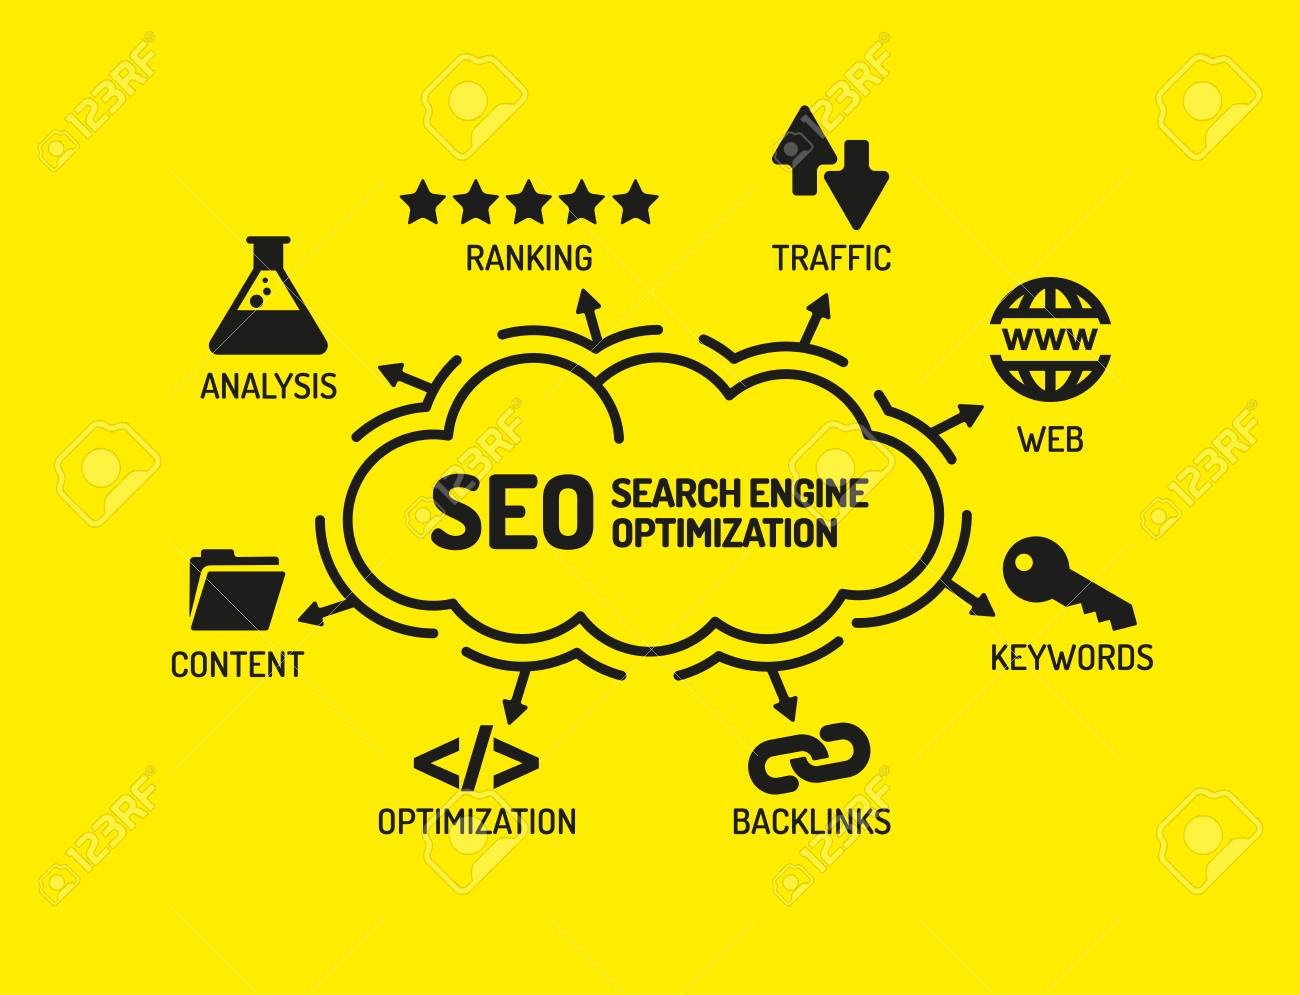 SEO Search Engine Optimization. Chart with keywords and icons on